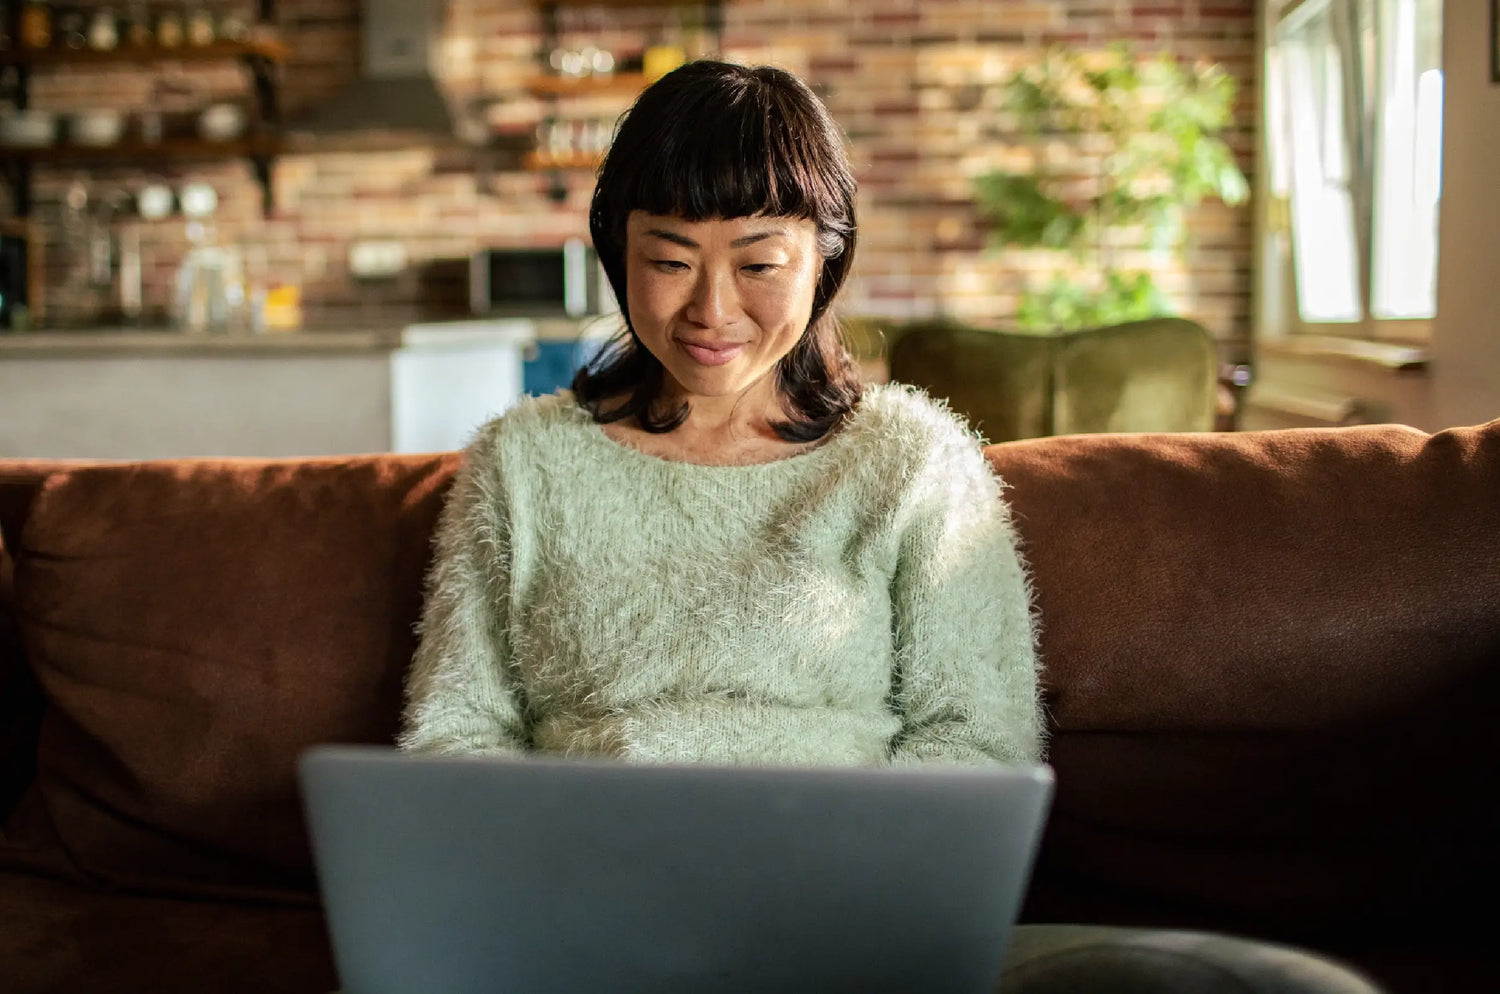 woman on a laptop sitting on the couch